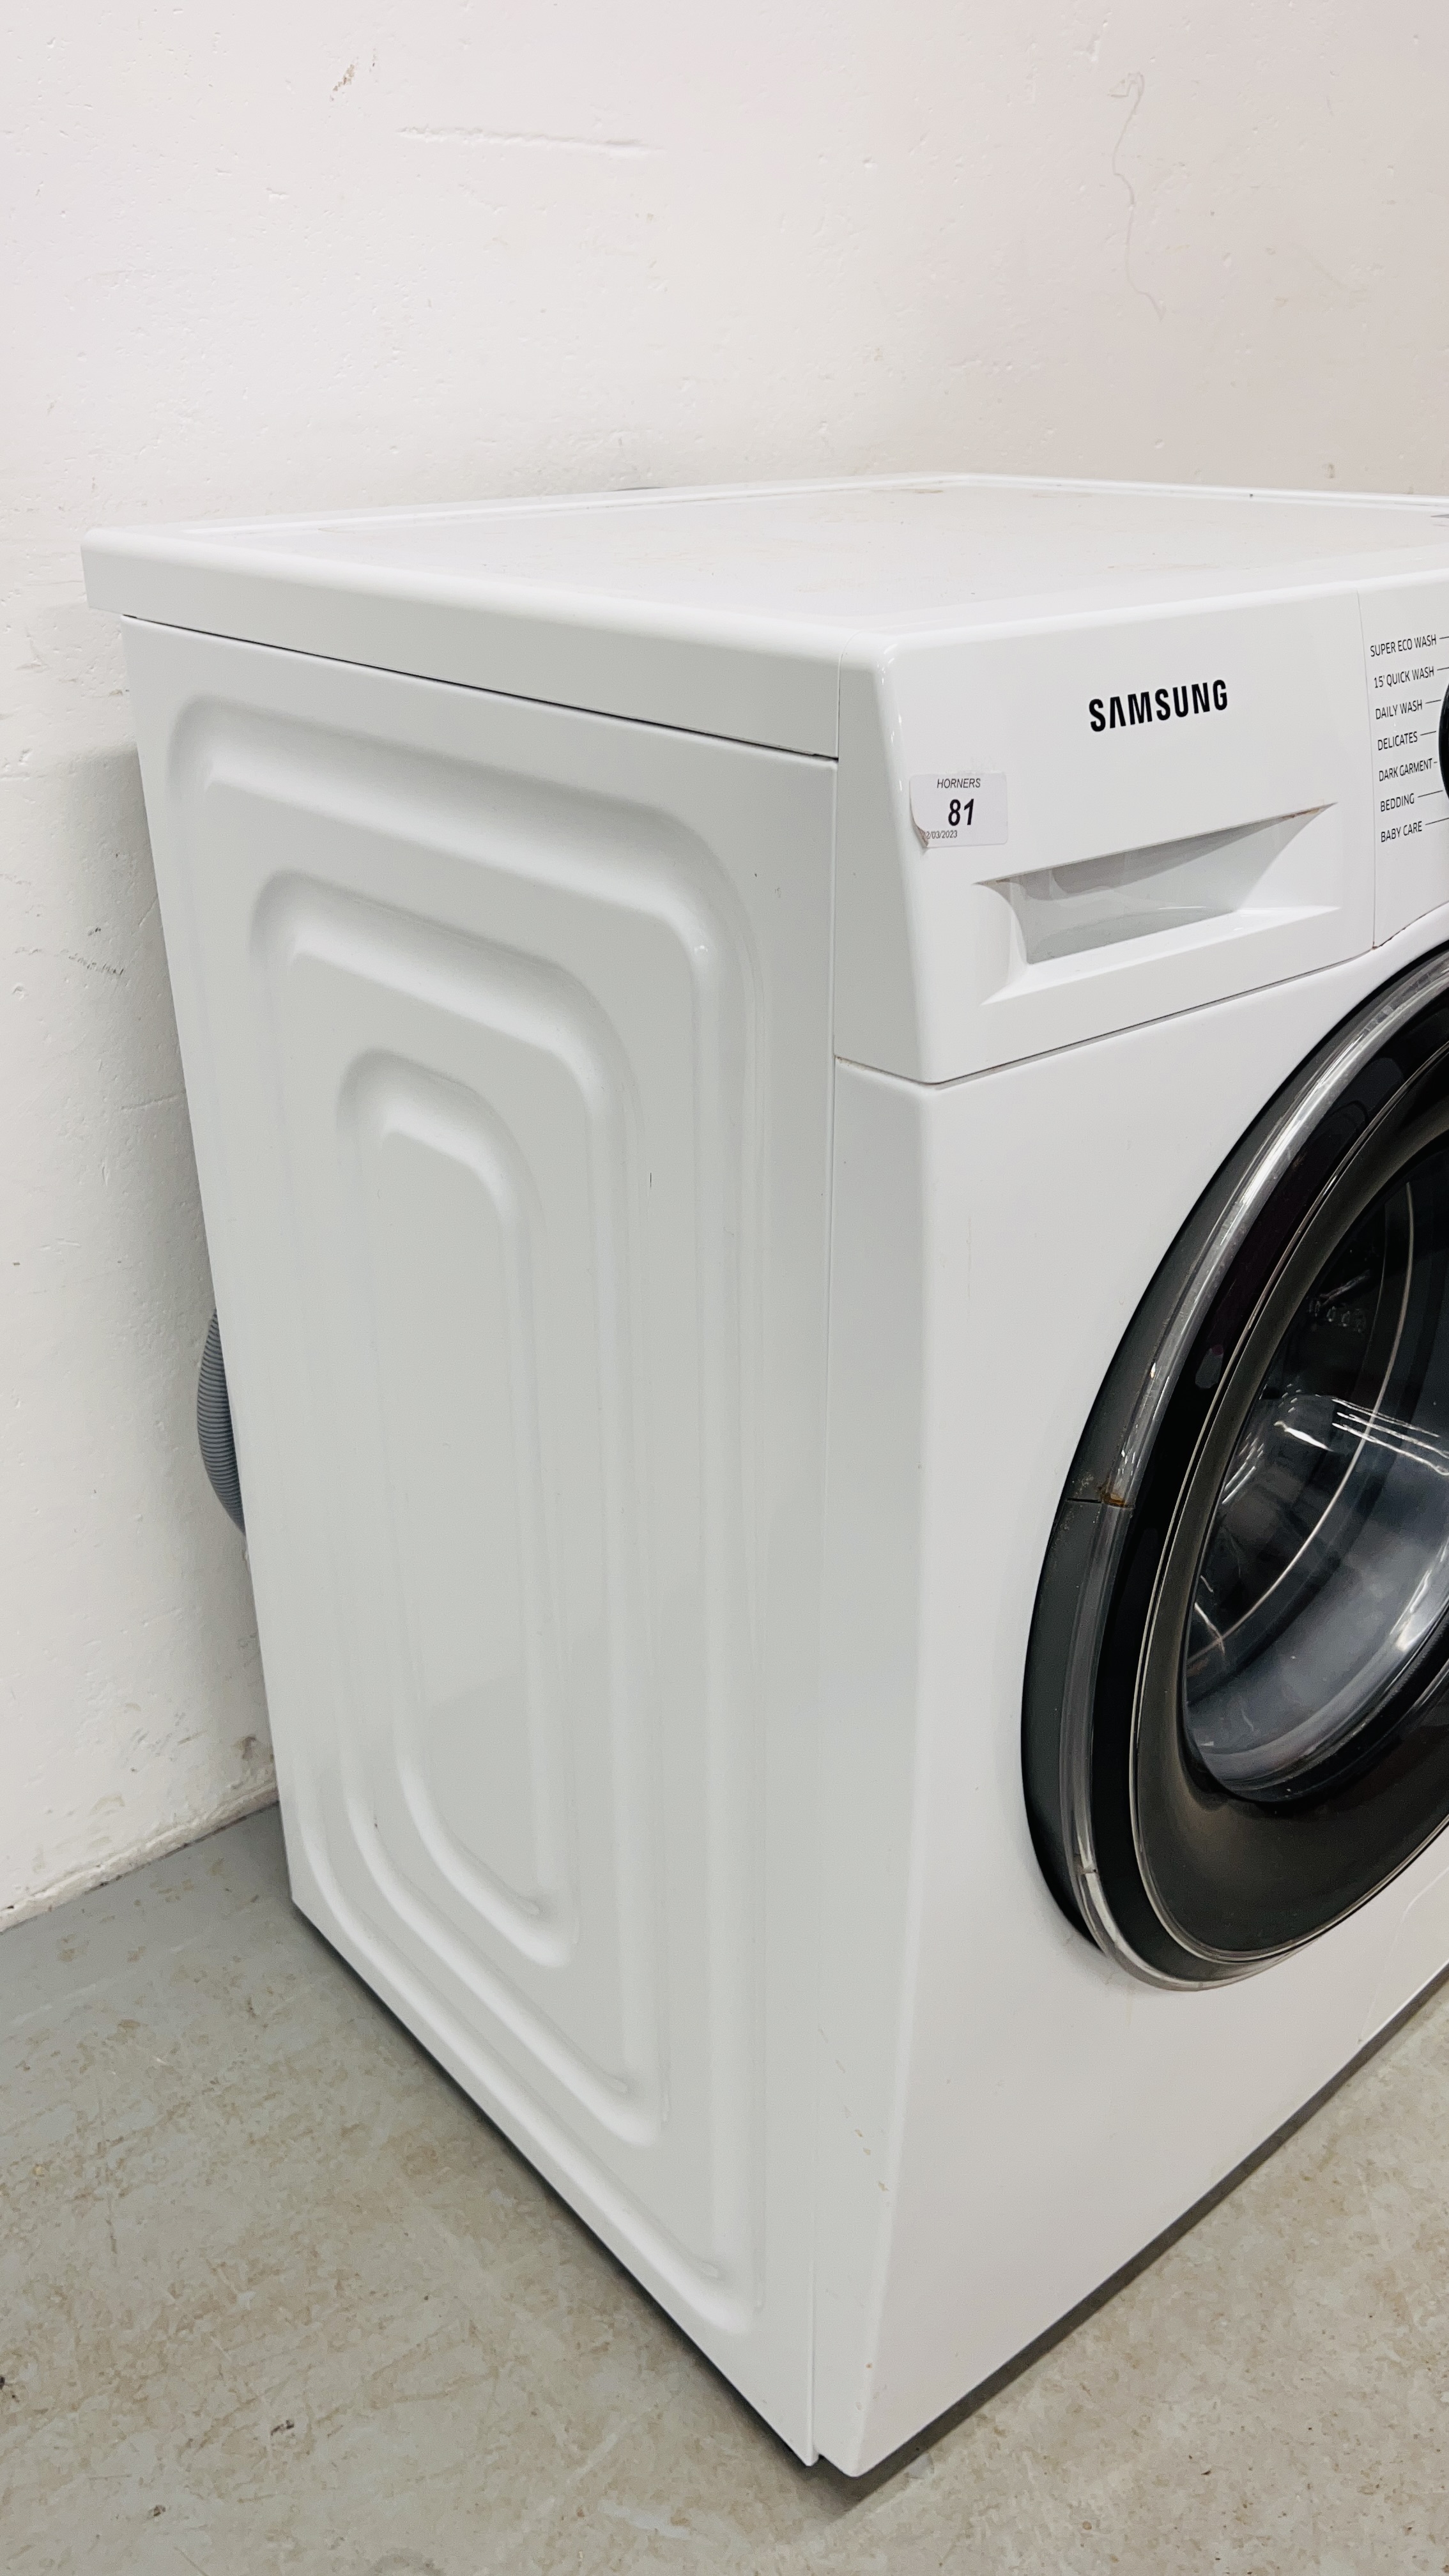 A SAMSUNG ECO BUBBLE 7KG WASHING MACHINE - SOLD AS SEEN. - Image 5 of 8